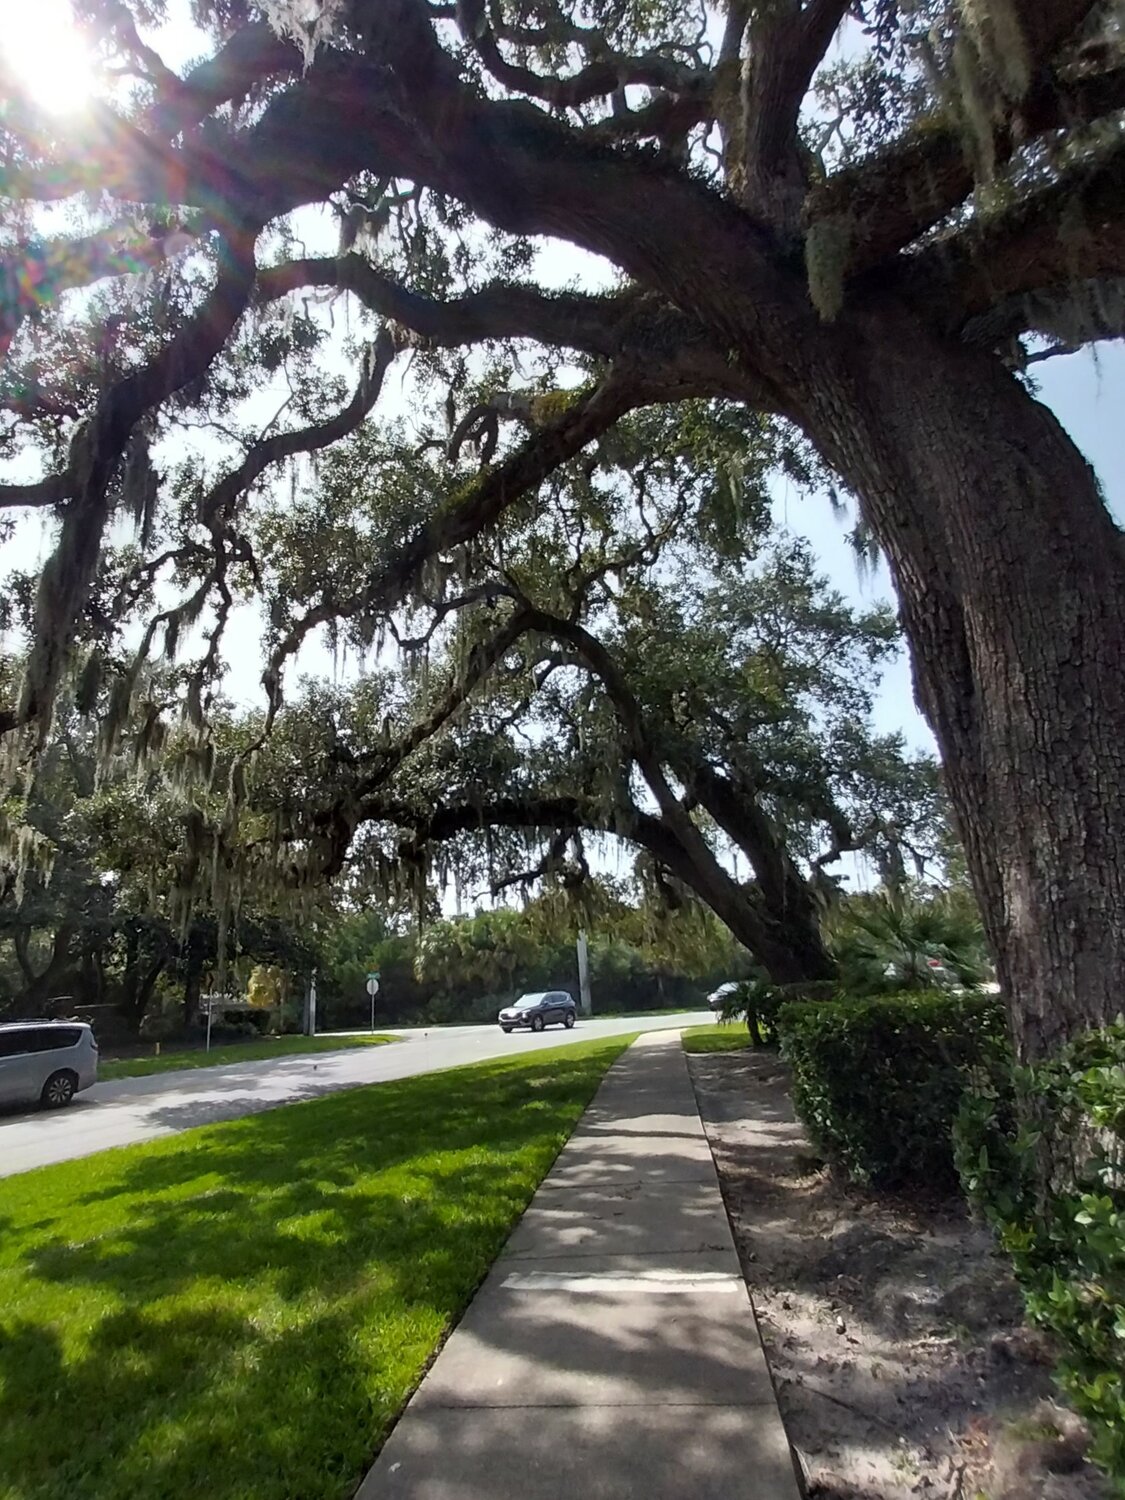 Residents living in the vicinity of a project on Mickler Road are concerned that work will damage majestic oaks there.